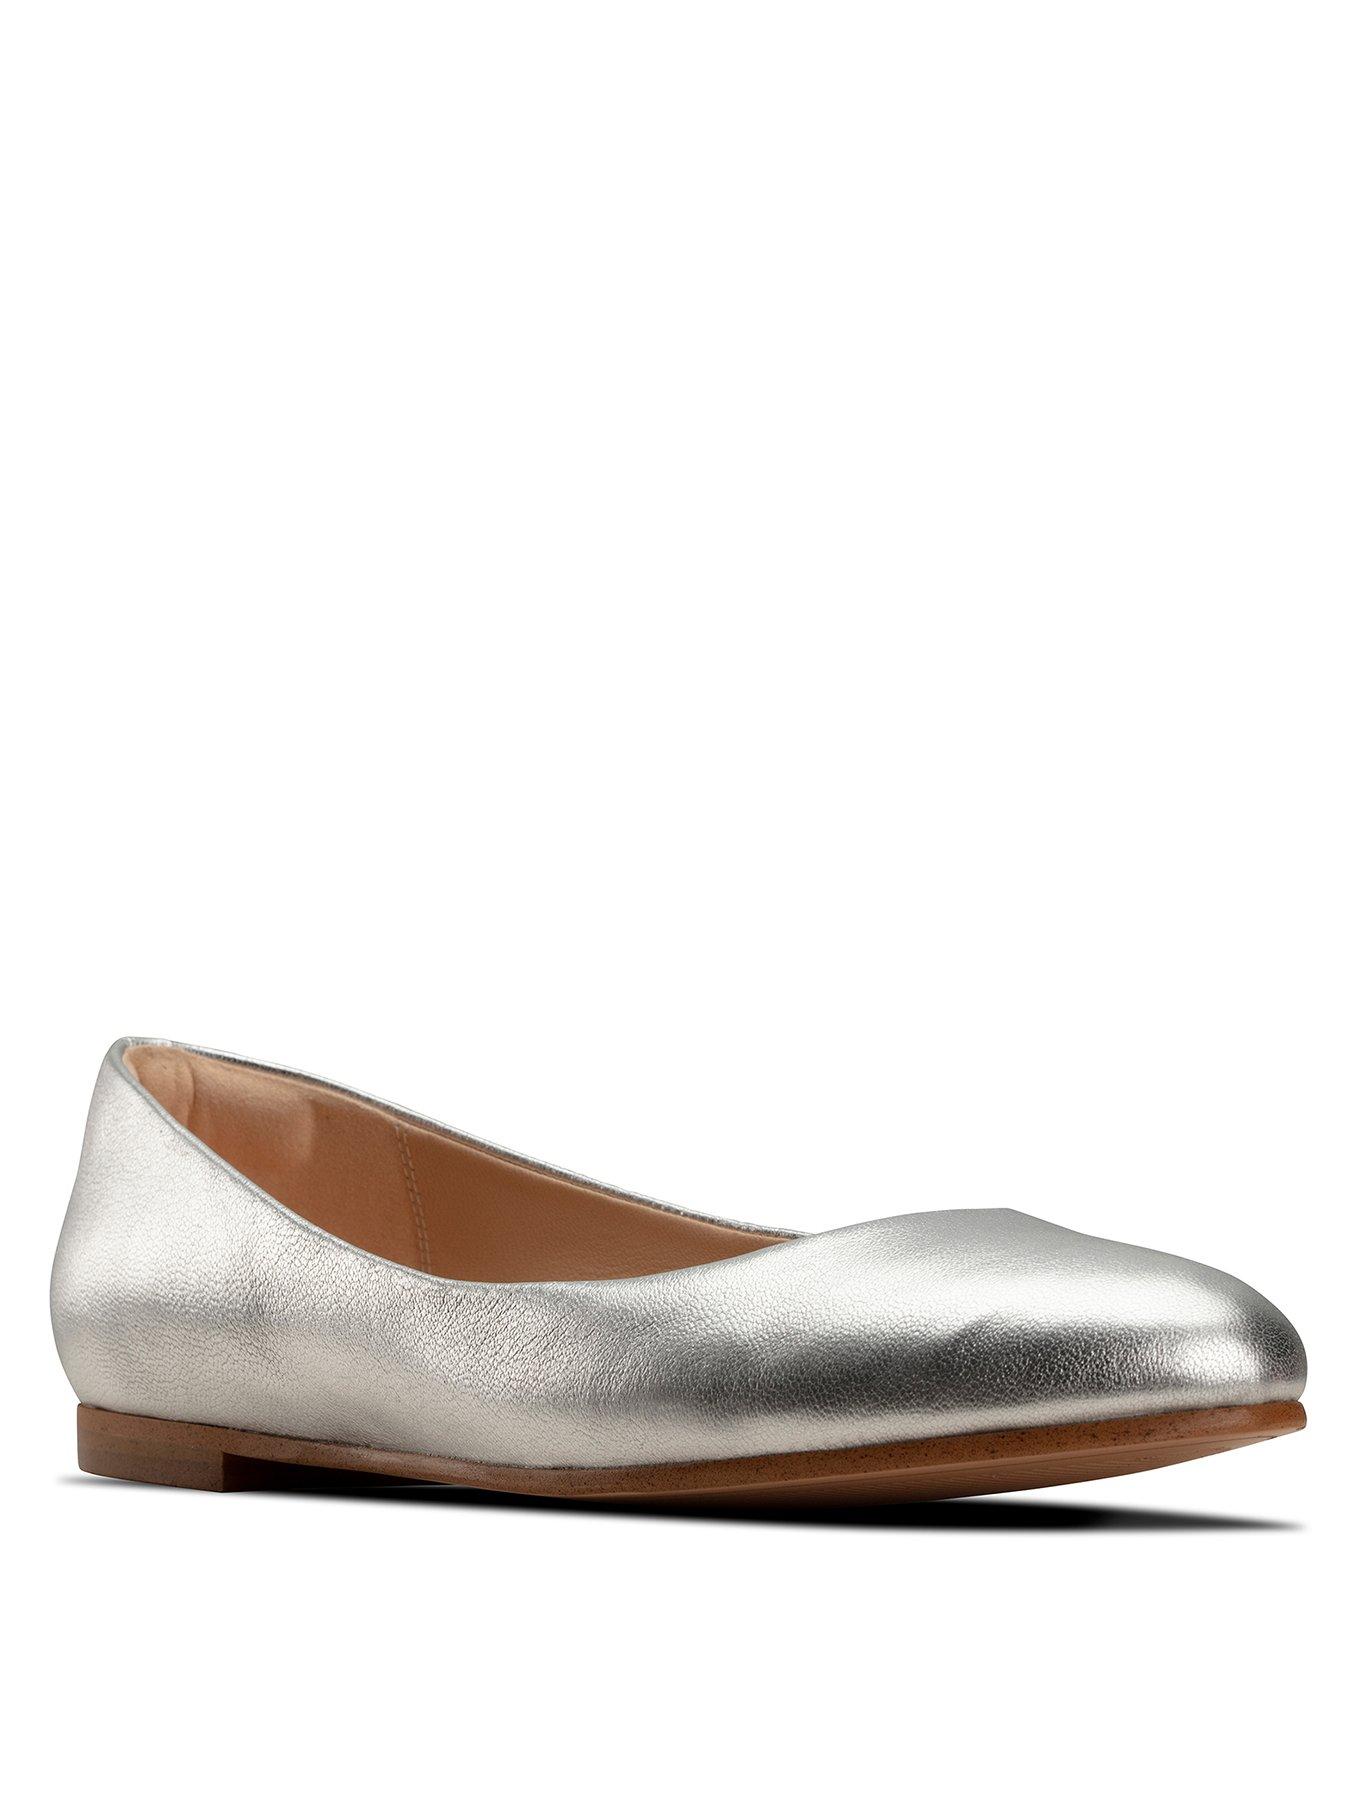 clarks ladies flat white shoes